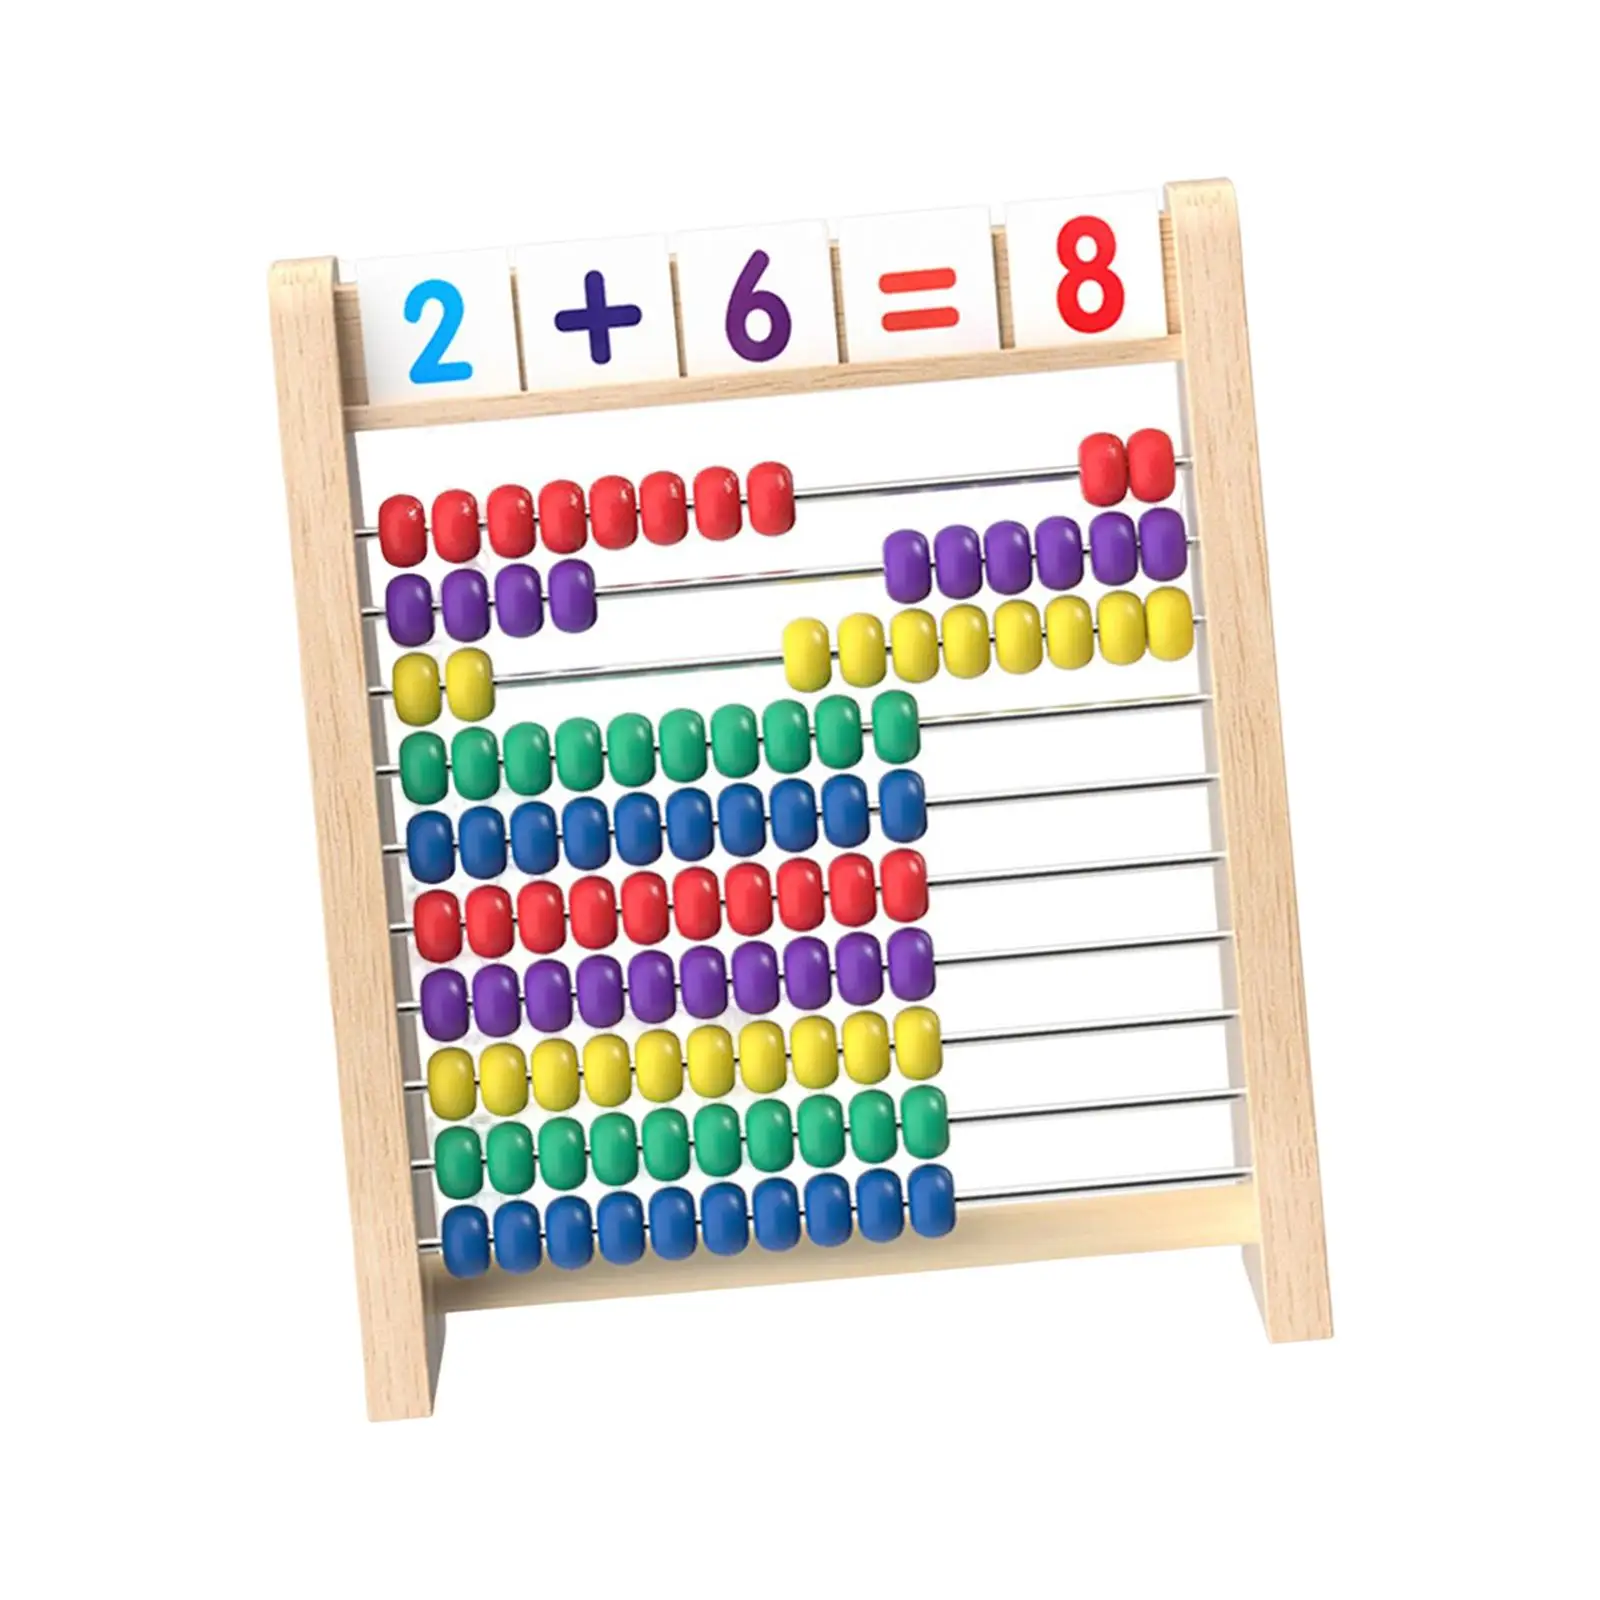 10 Row Math Learning Toys Educational Multicolor Beads Counting Counting Sticks Preschool Learning Toy for Activity Toys